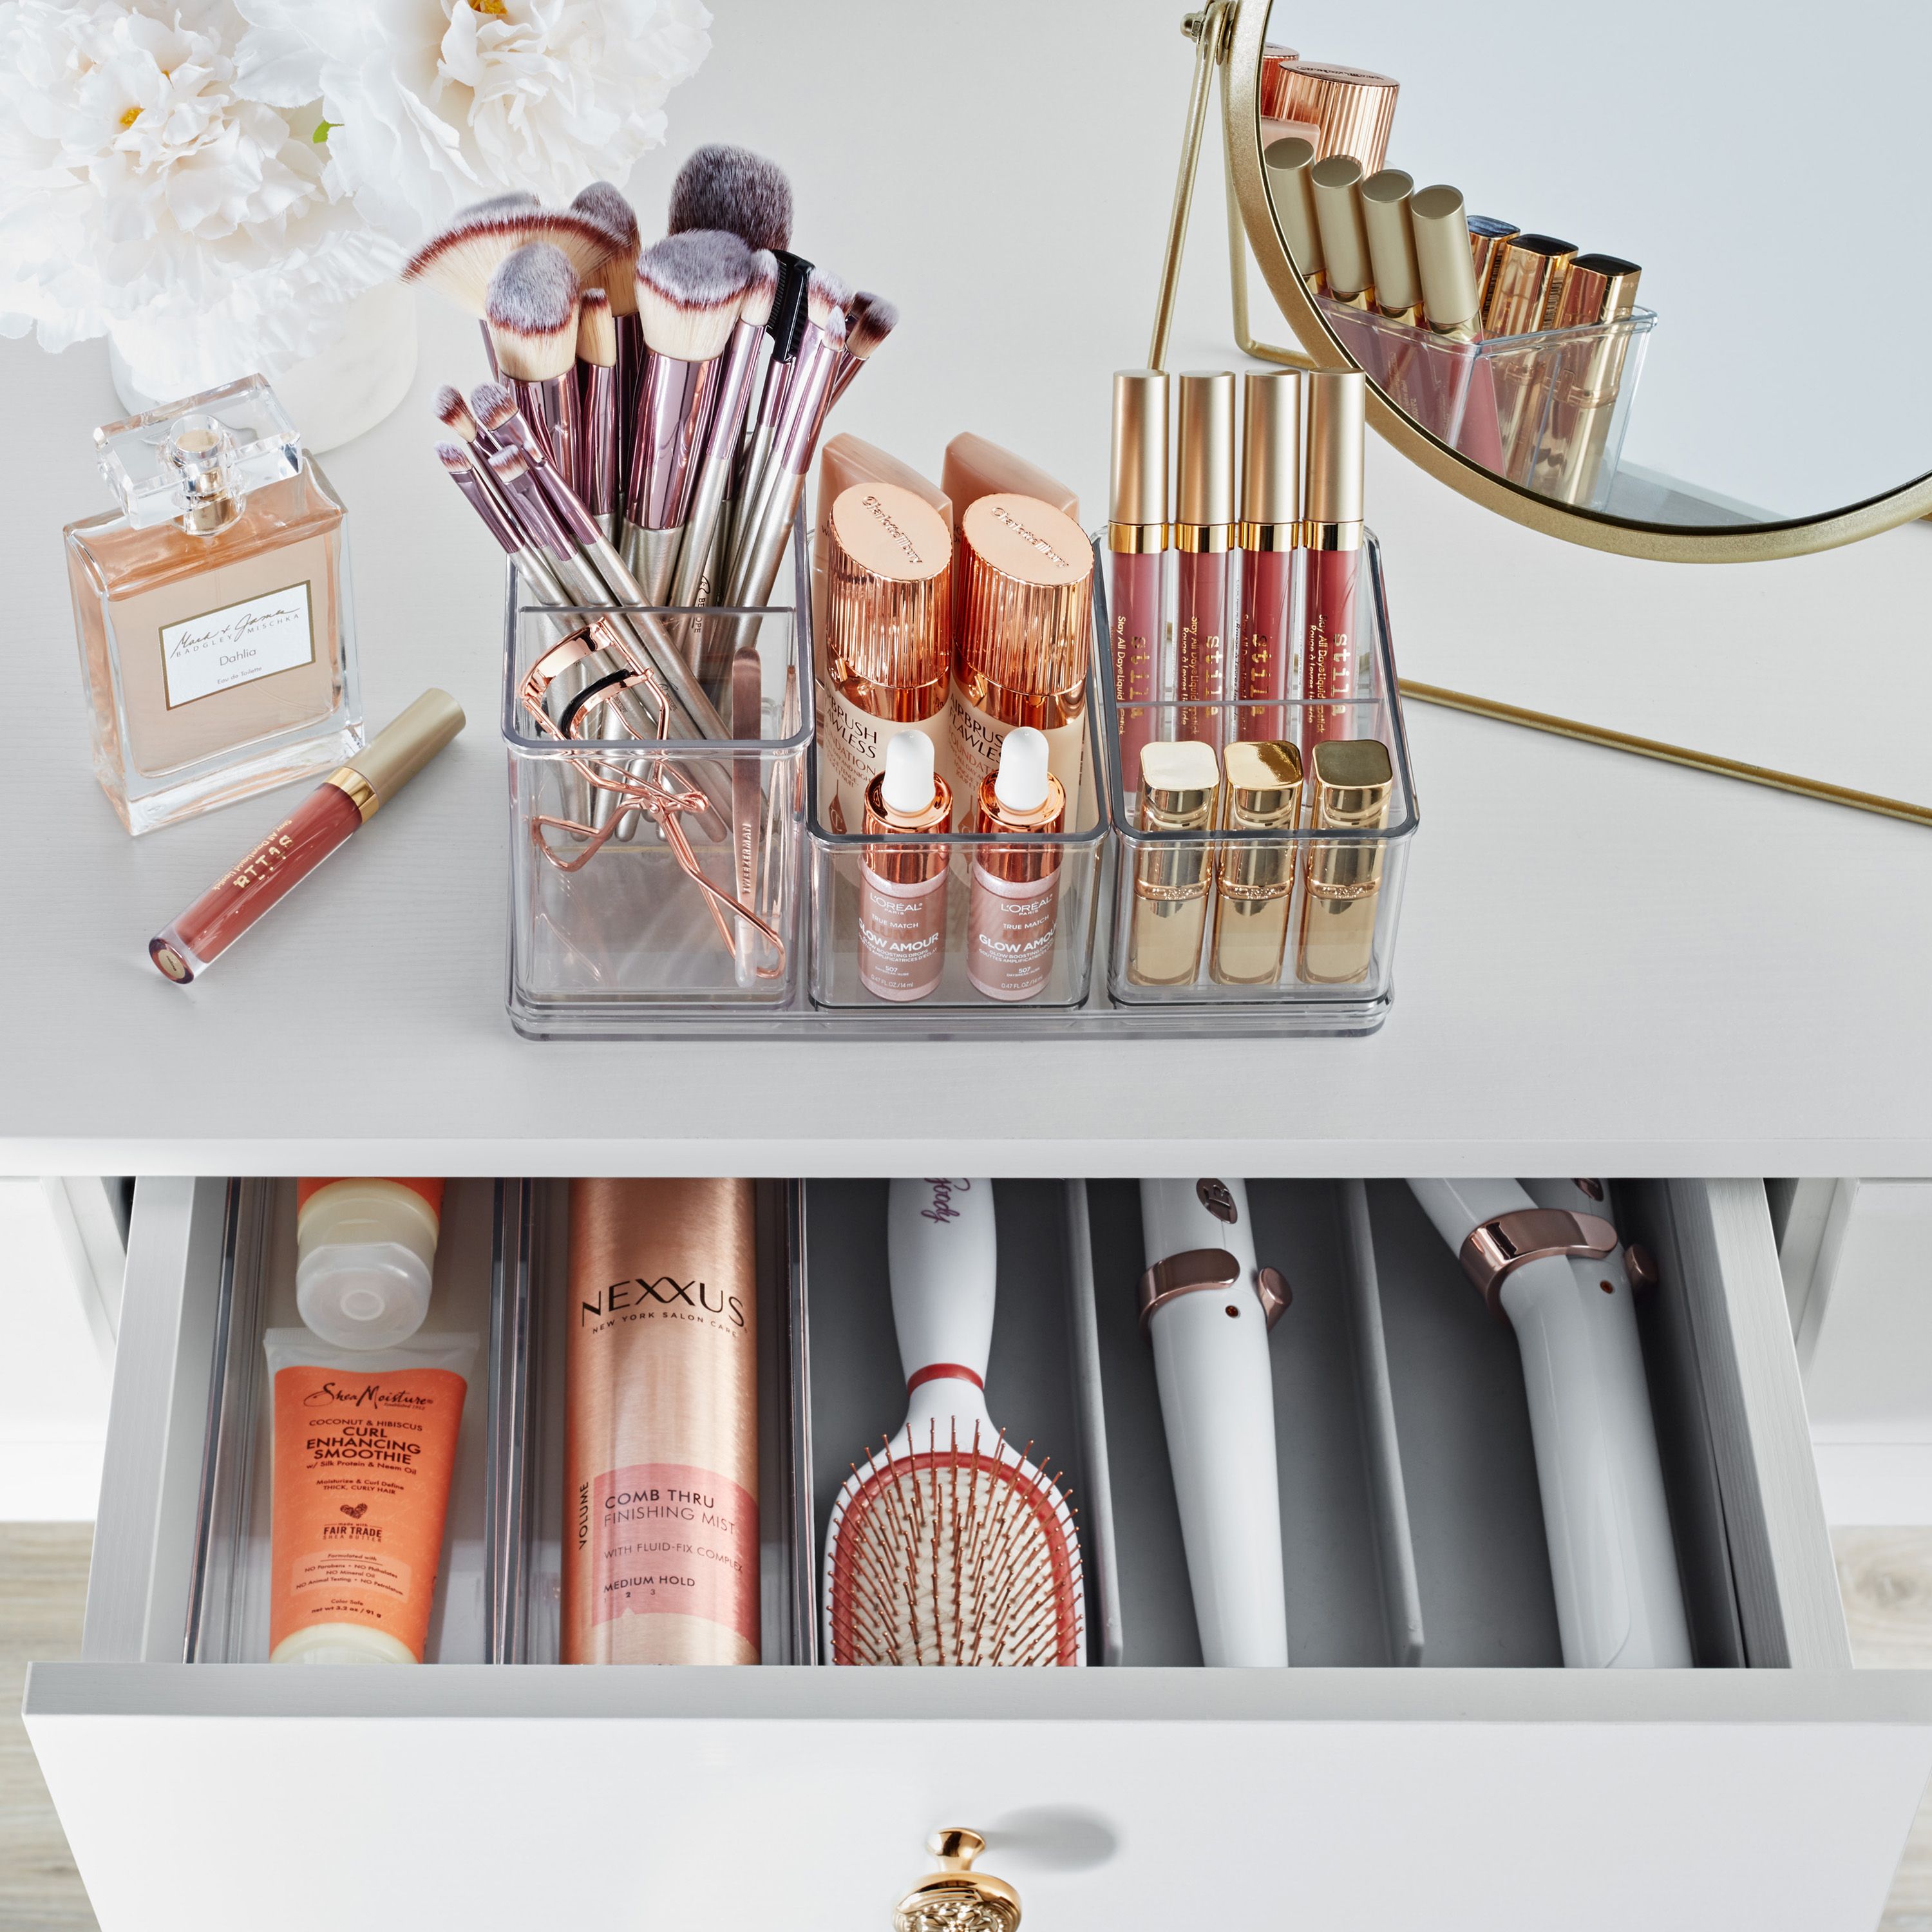 How to Organize Your Hair Products, According to The Home Edit – Mane by  Mane Addicts